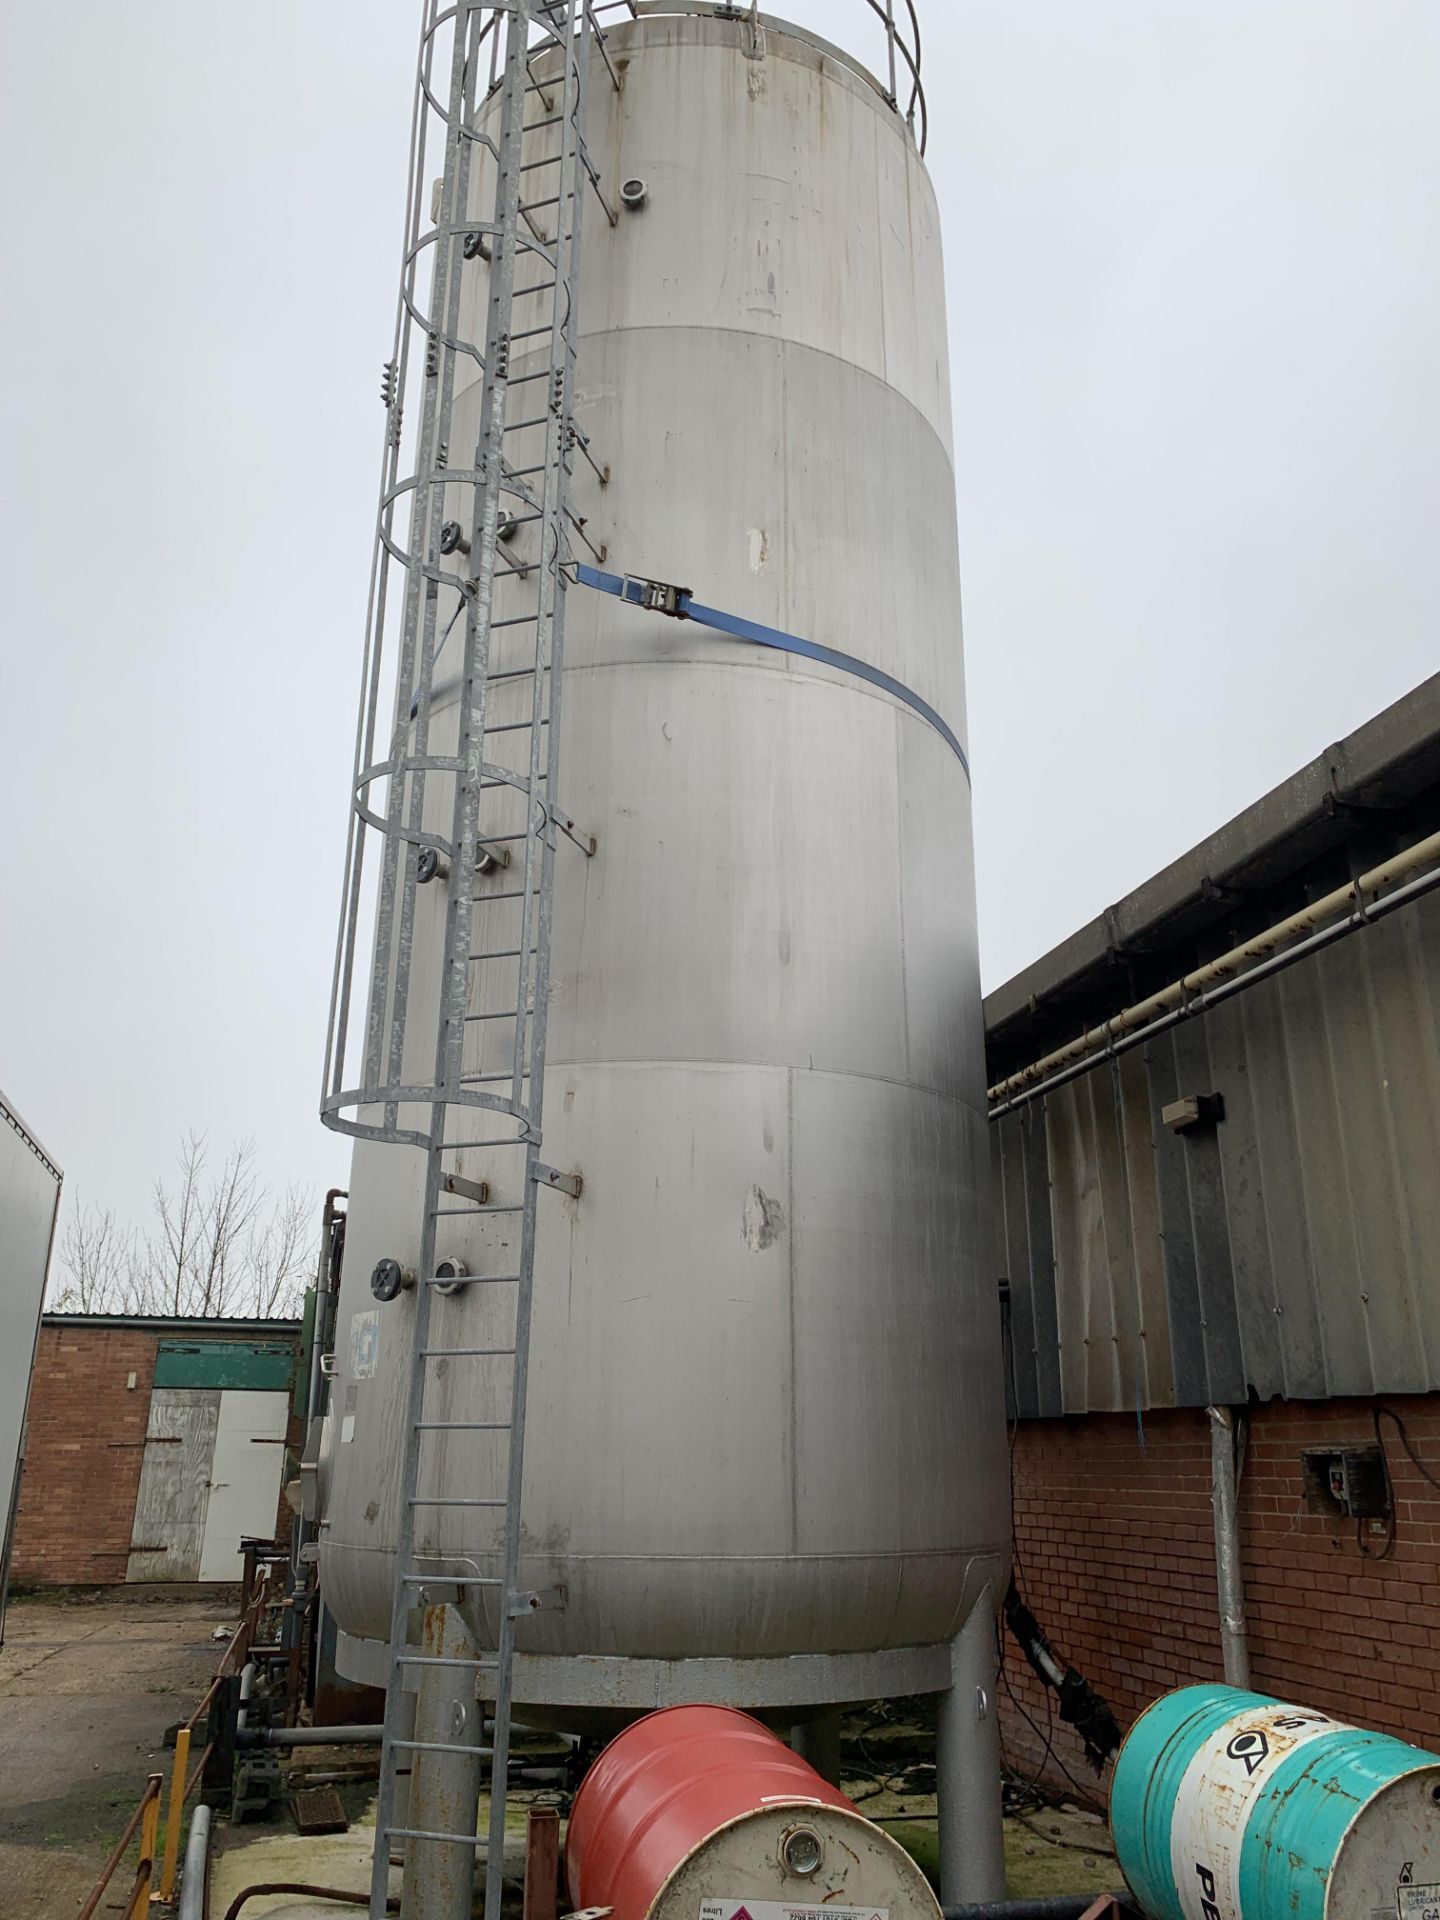 59,000 Litres 1298 Gallon Vertical Stainless Steel 304 Storage Tank with supports & access ladder